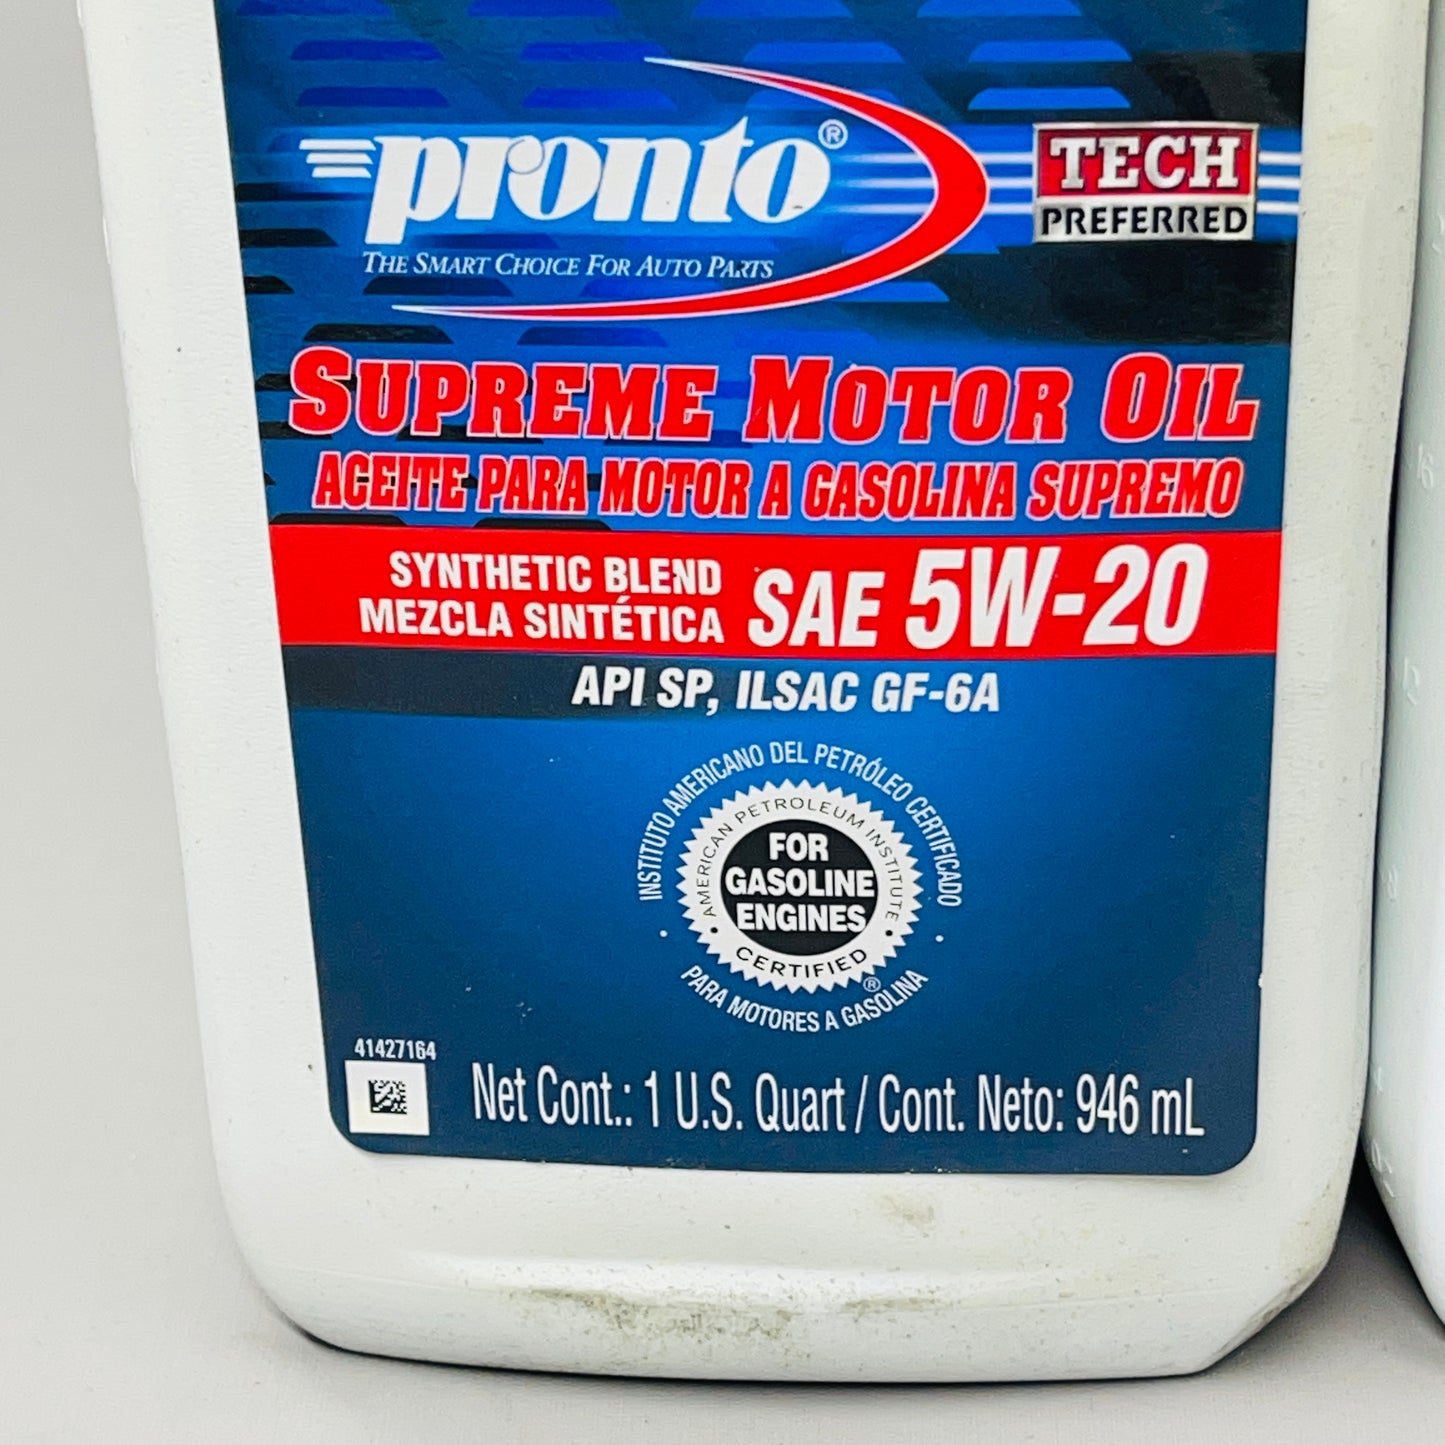 PRONTO Pack of 12 SAE 5W-20 Synthetic Blend Supreme Motor Oil 1 Quart 512SBPR (New)